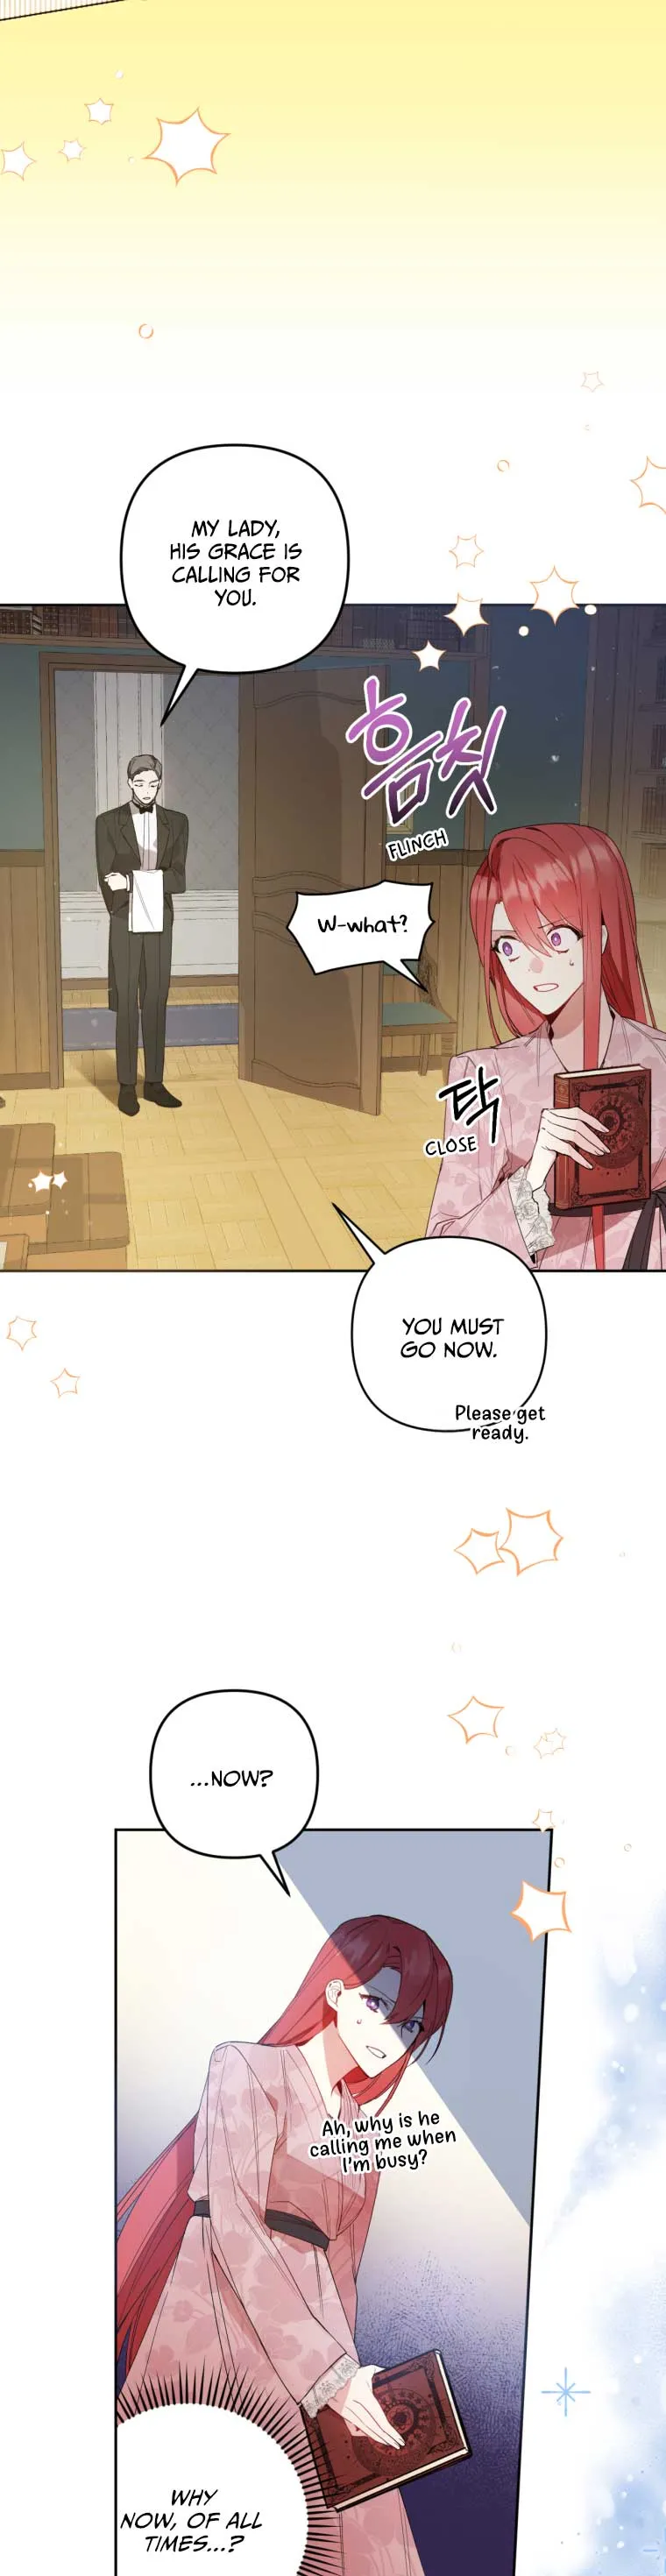 Noble Lady or Whatever, I’m Going Home - chapter 3 - #3